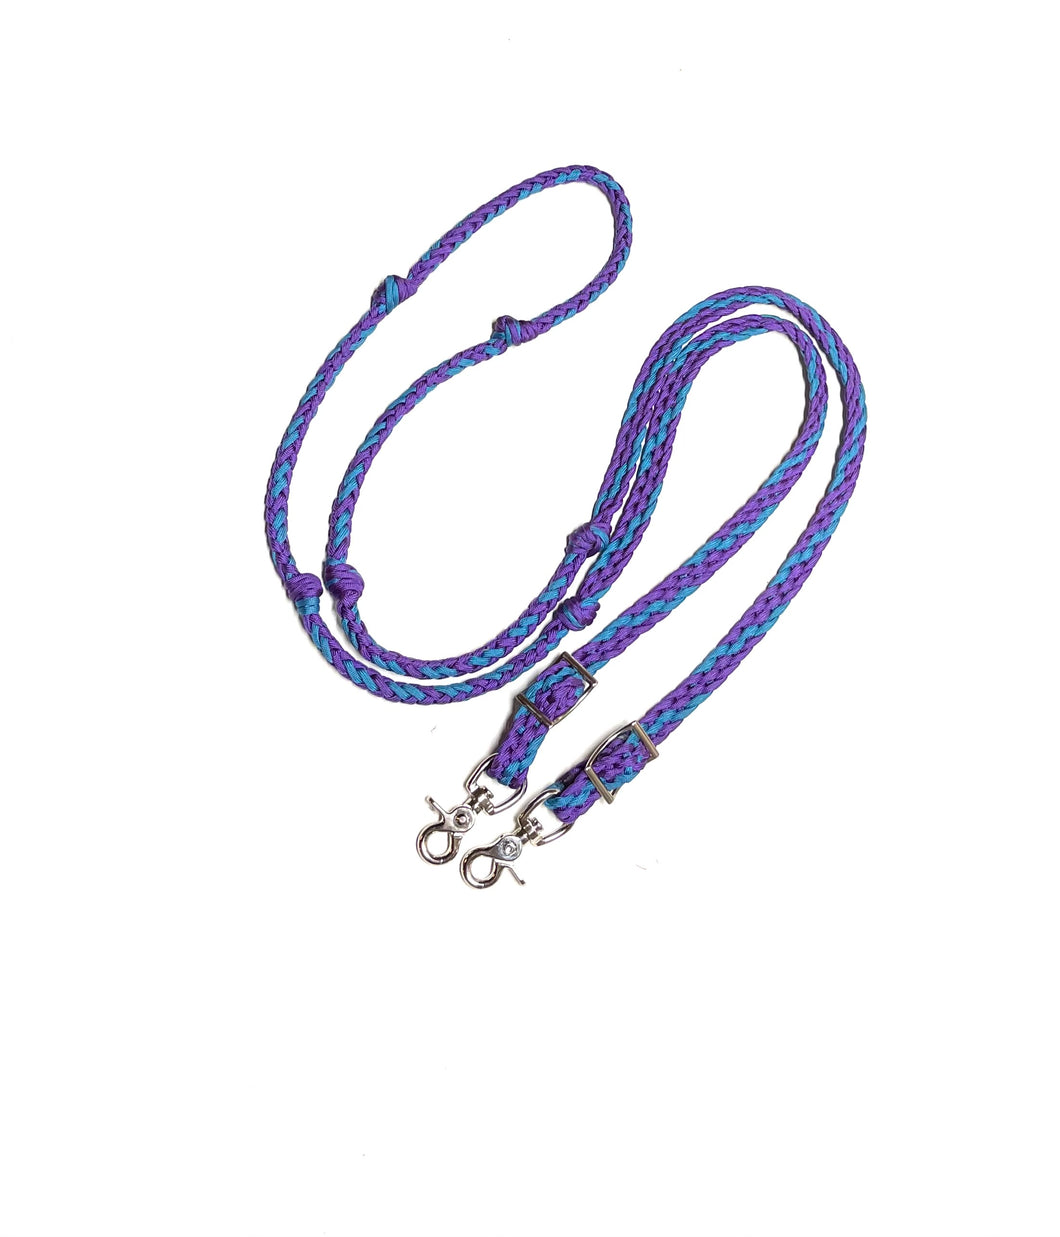 SALE barrel reins with  grip knots 8’ purple and carribean blue